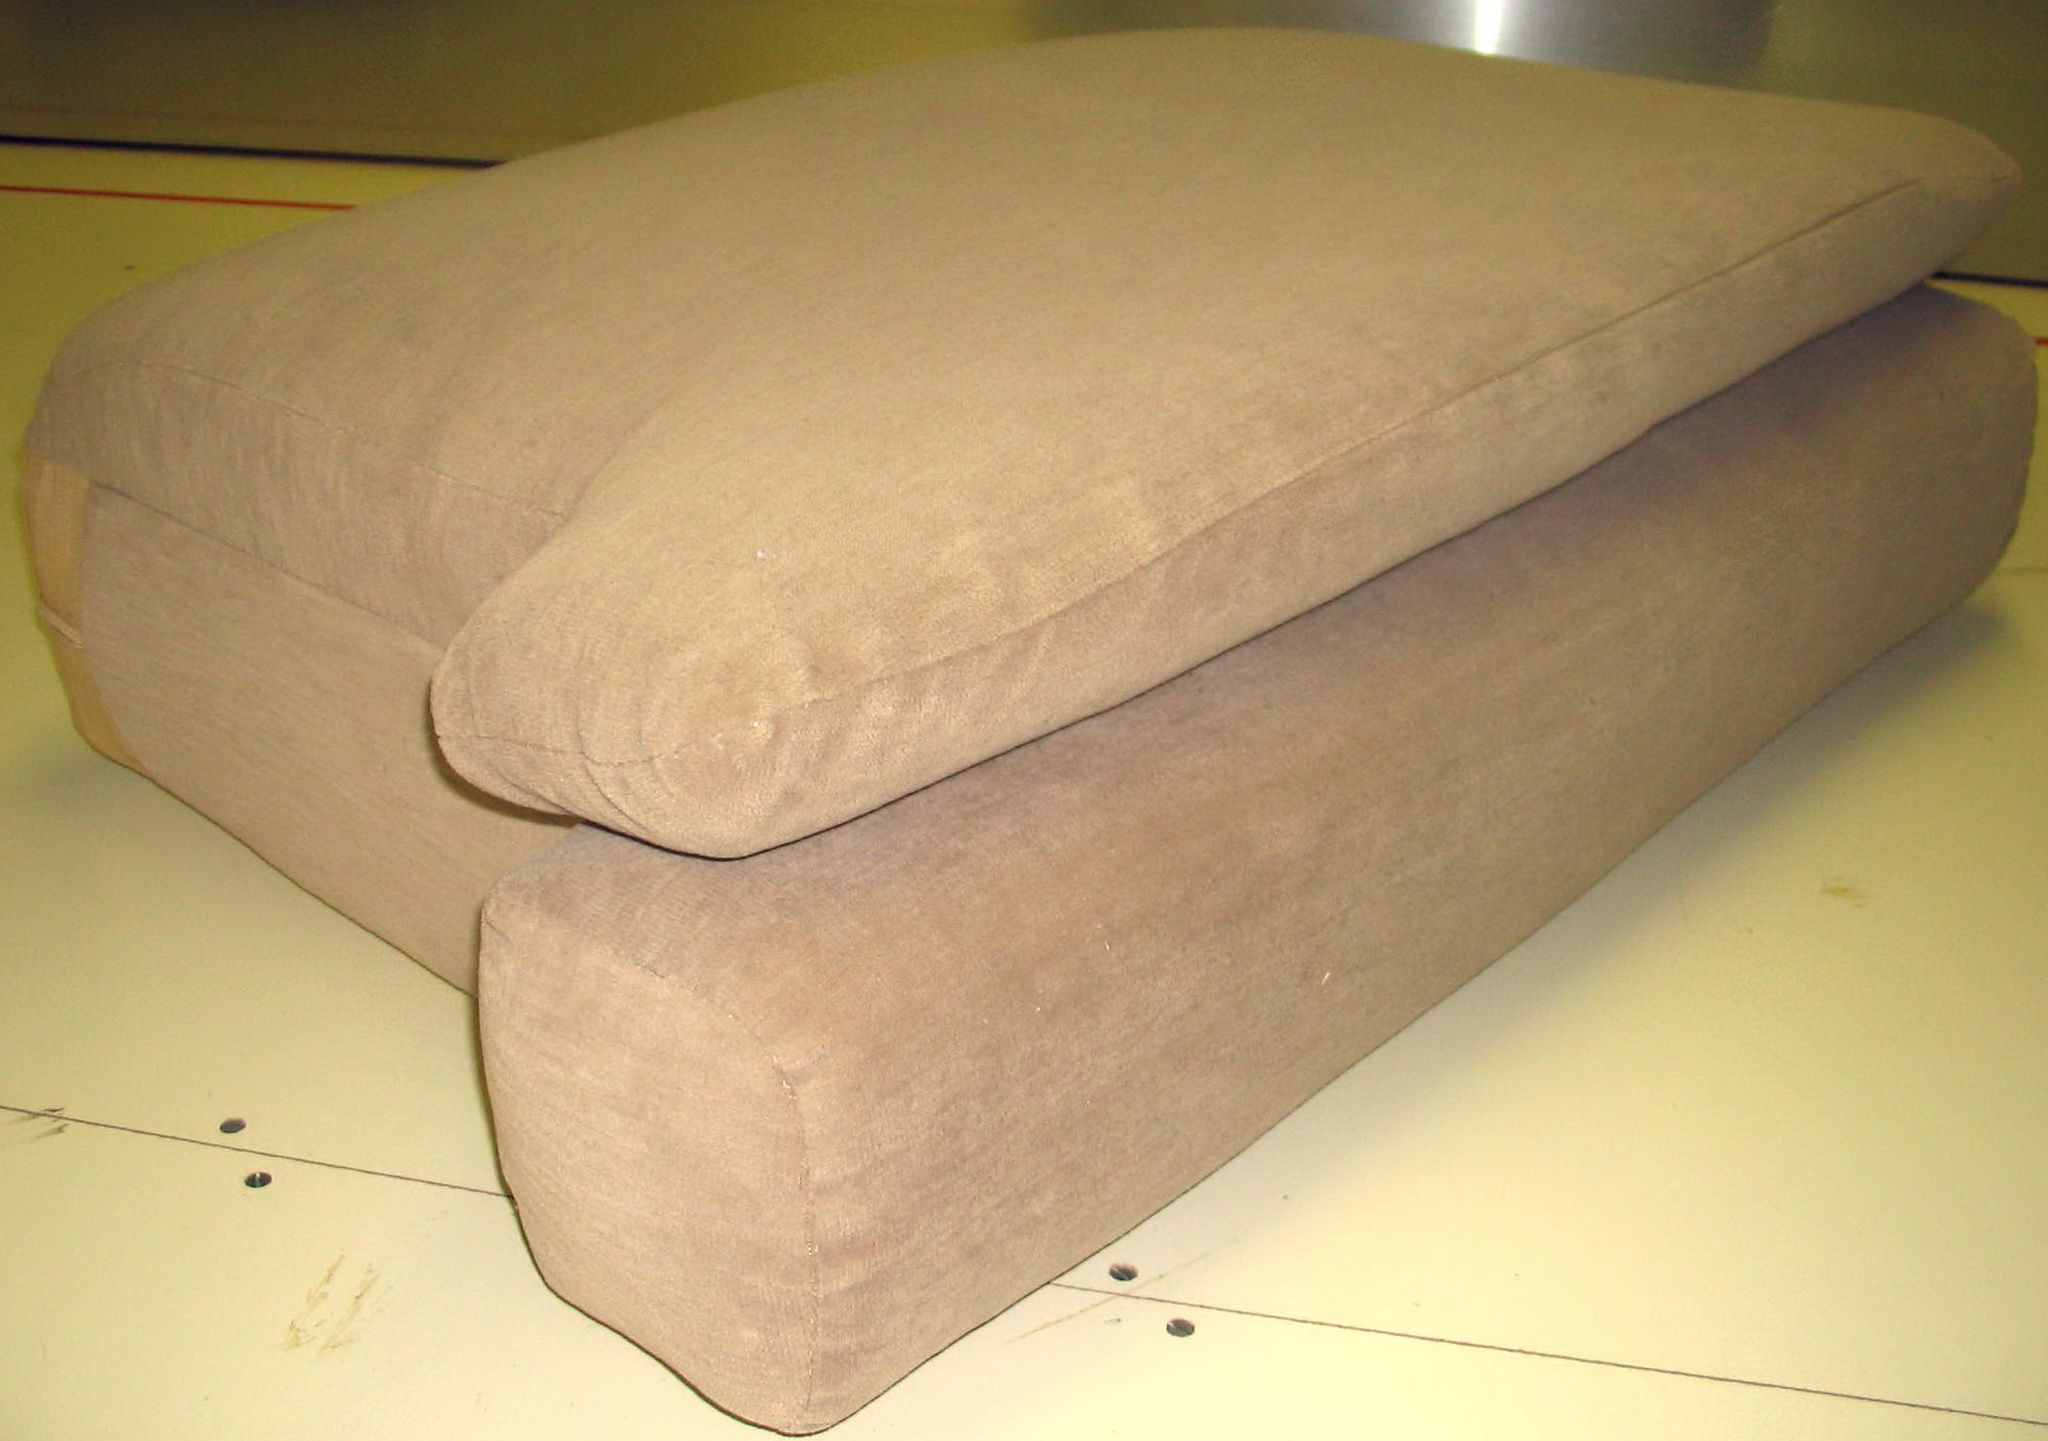 Replace Sofa Cushions With Memory Foam Home Design Ideas